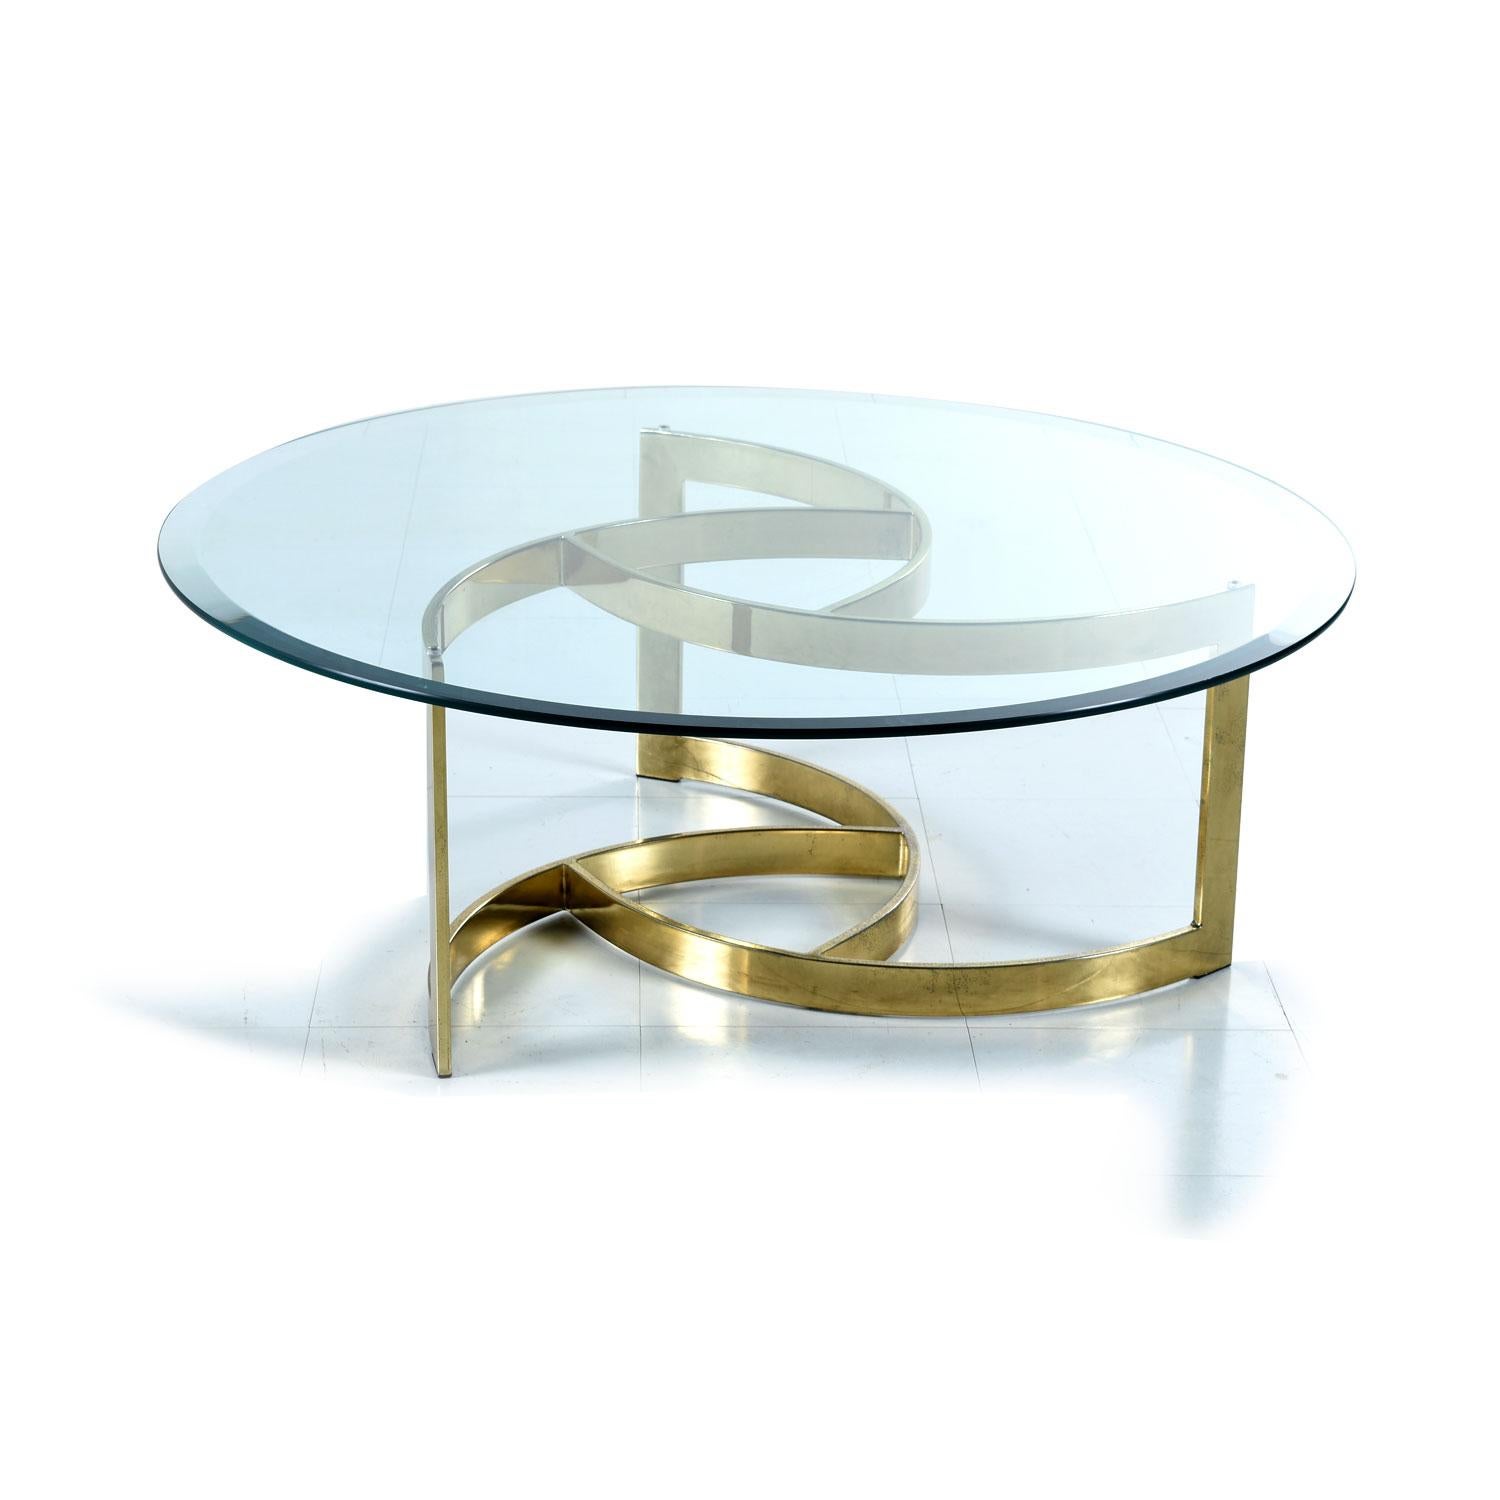 This glamorous gold colored coffee table features a beveled circular glass top. The circle top is complimented by the graceful spiral shaped brass base. Light glimmers through the crystalline glass and glittering gold metallic finish. Your coffee